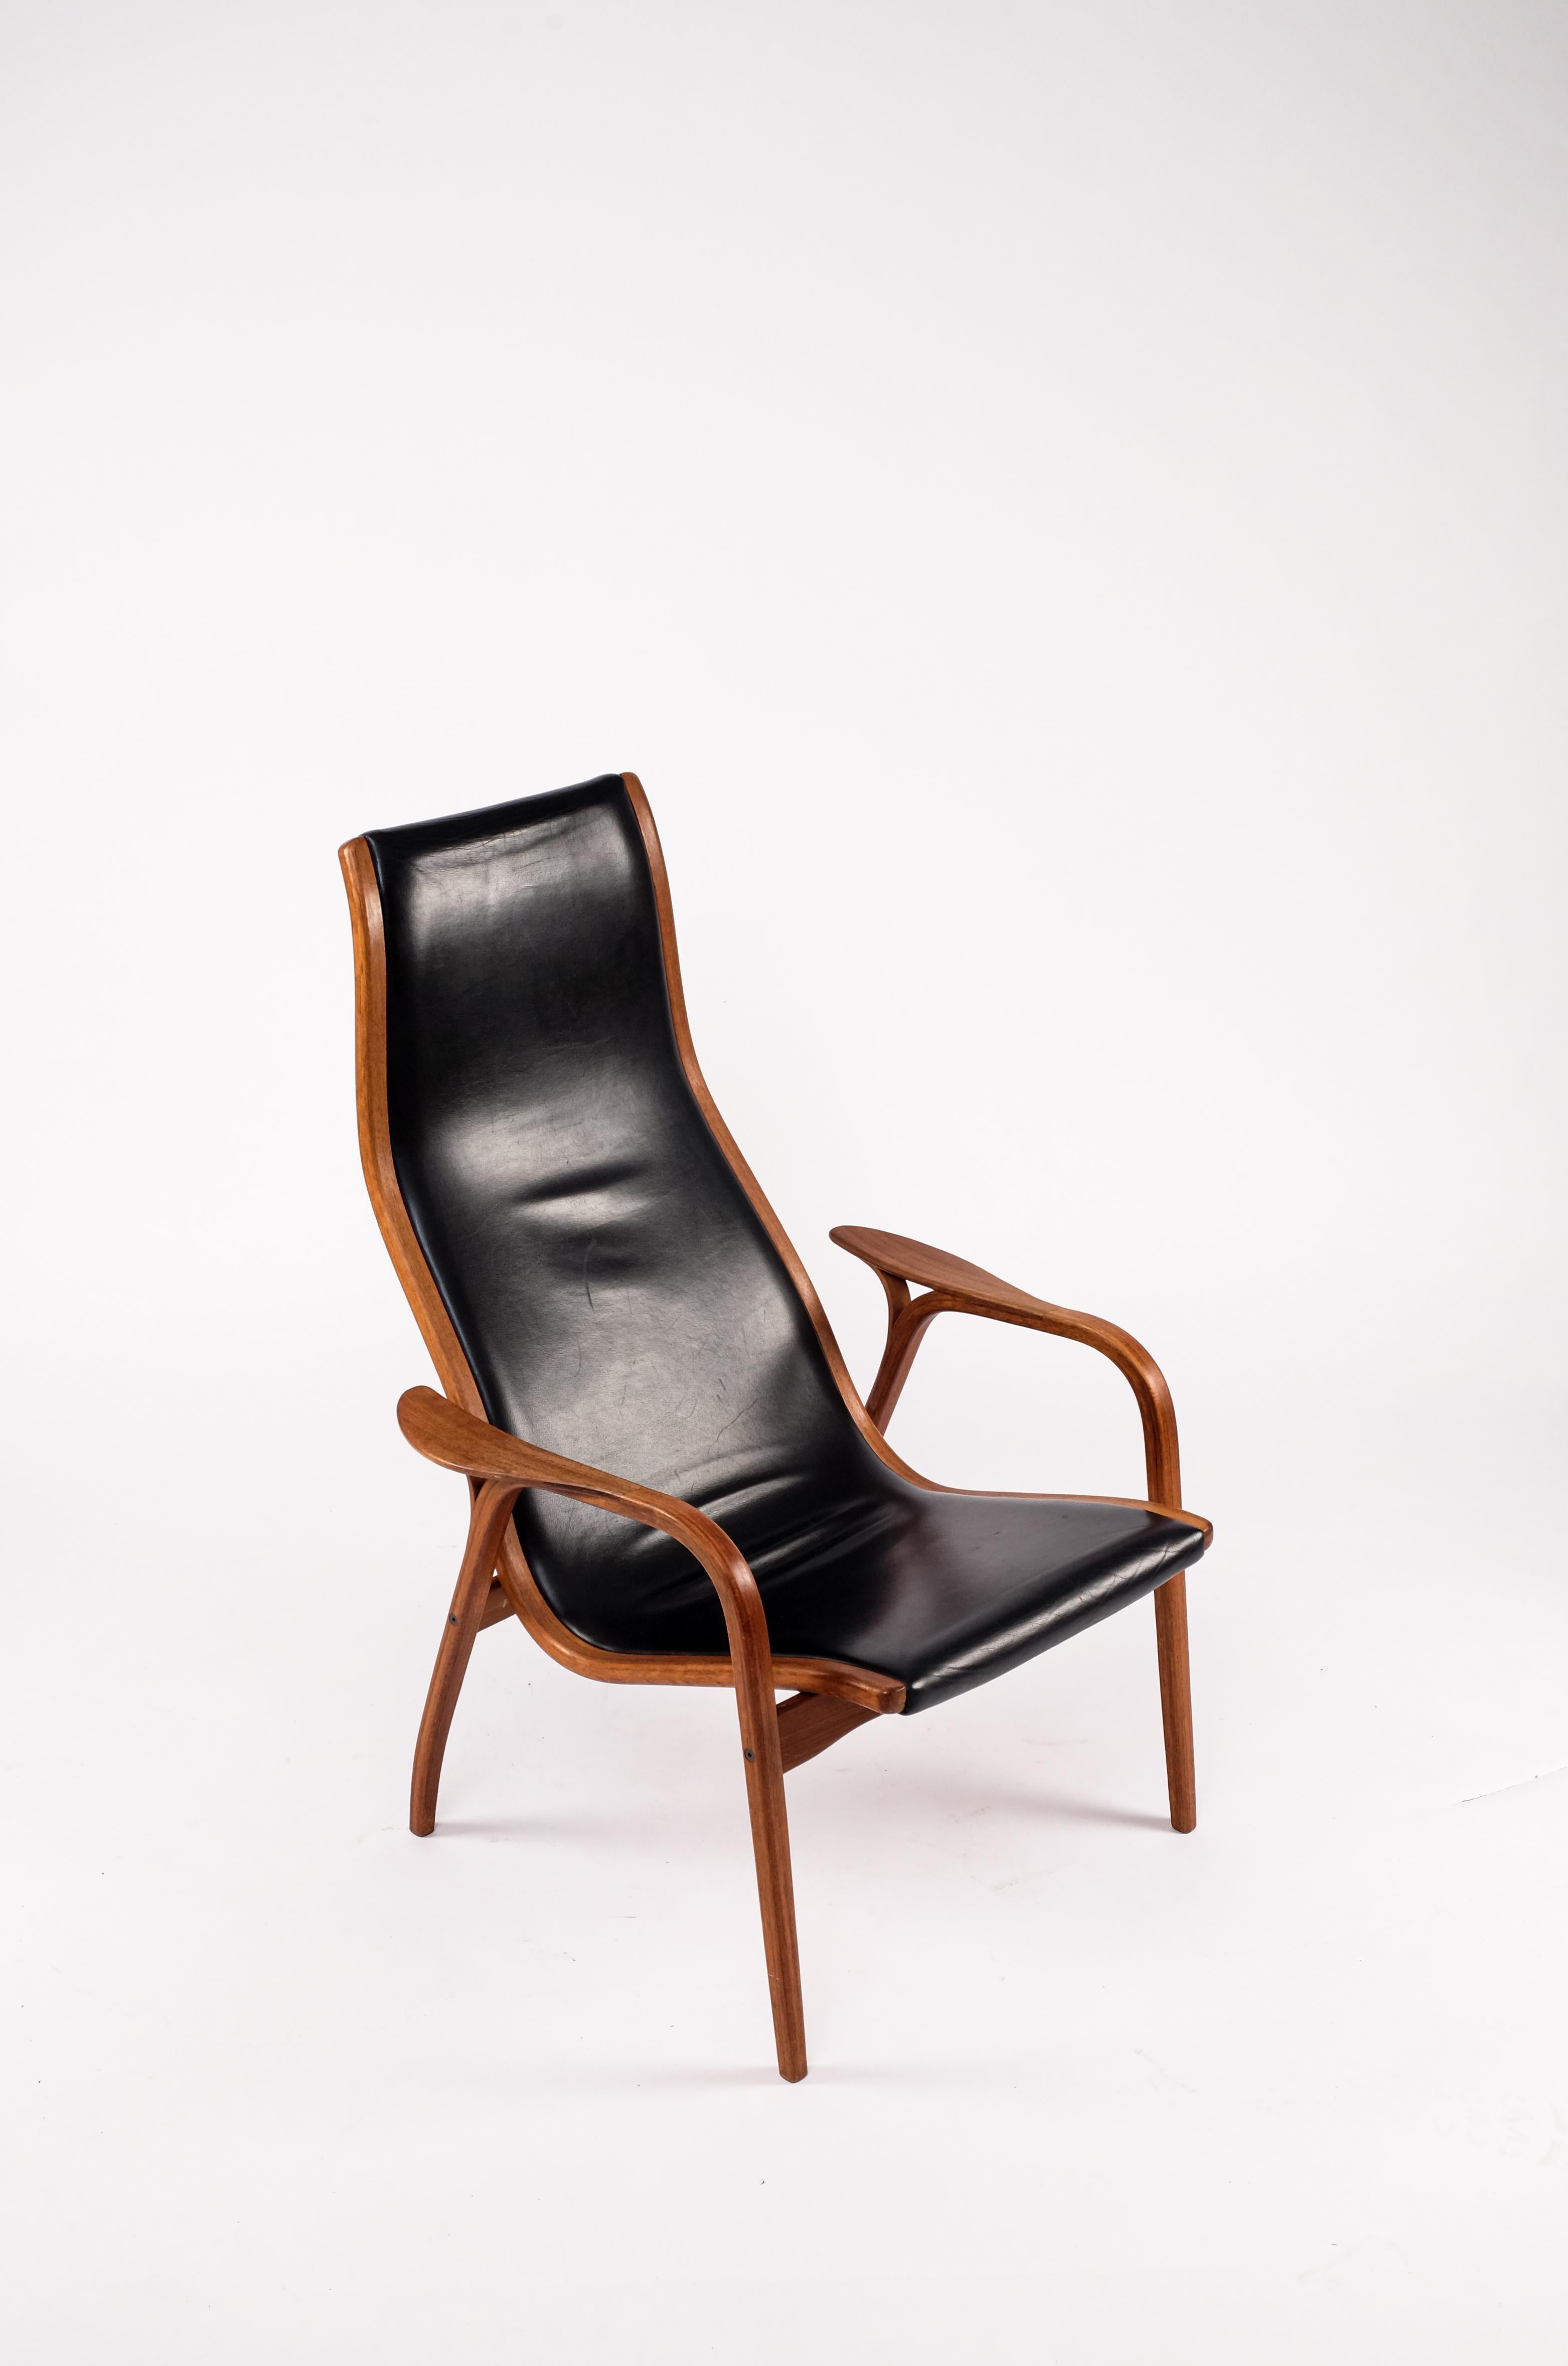 Scandinavian Modern Lamino chair by Yngve Ekström for Swedese. This chair features bentwood teak construction with original black leather upholstery.